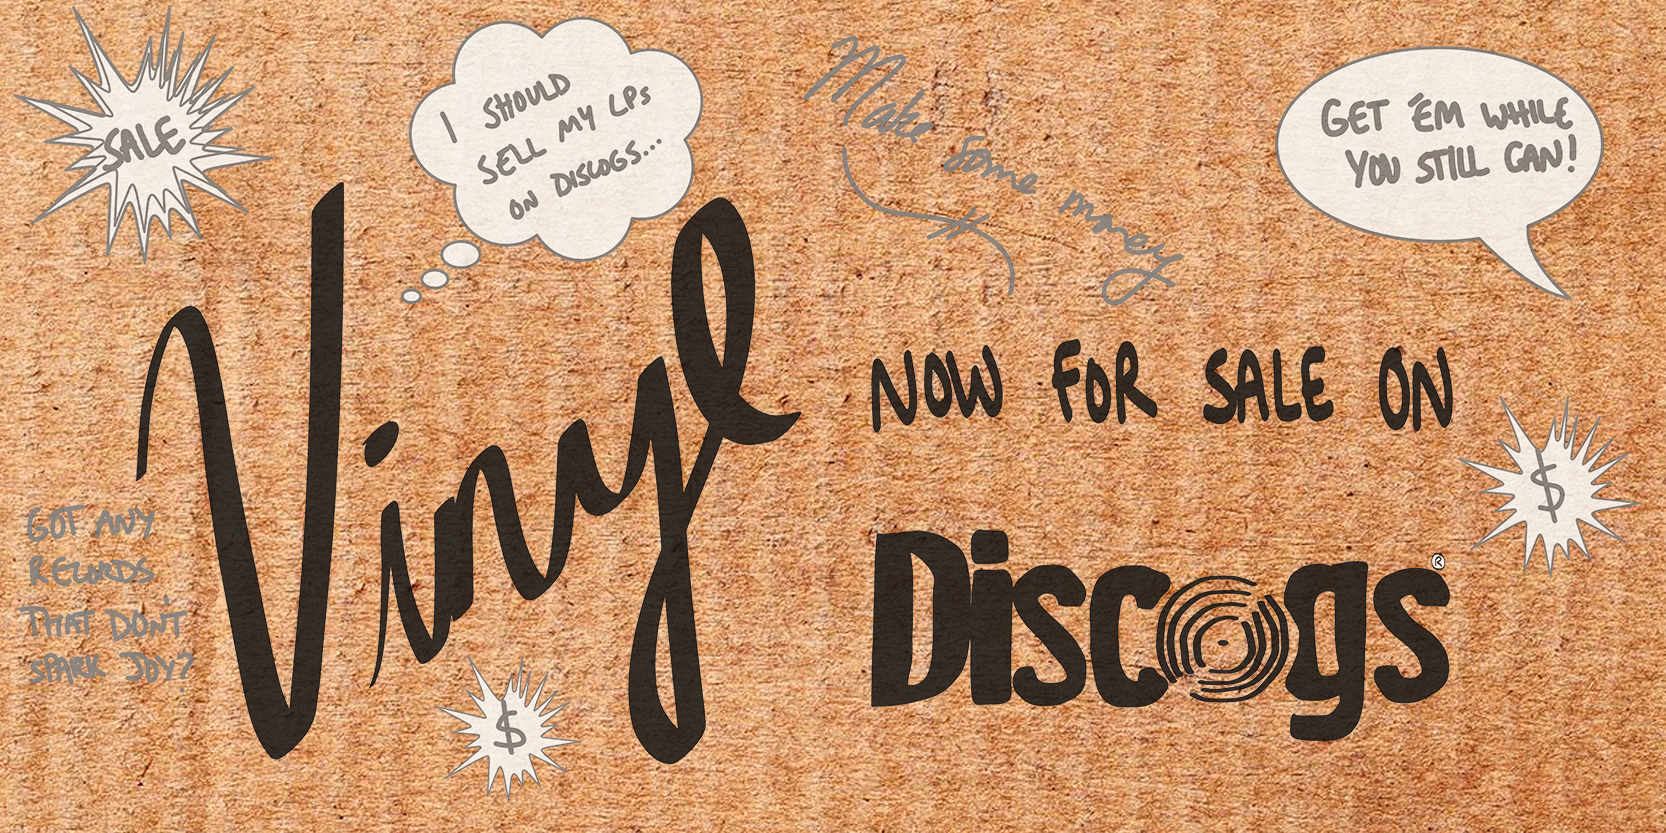 How Can I Apply A Discount To My Items? – Discogs